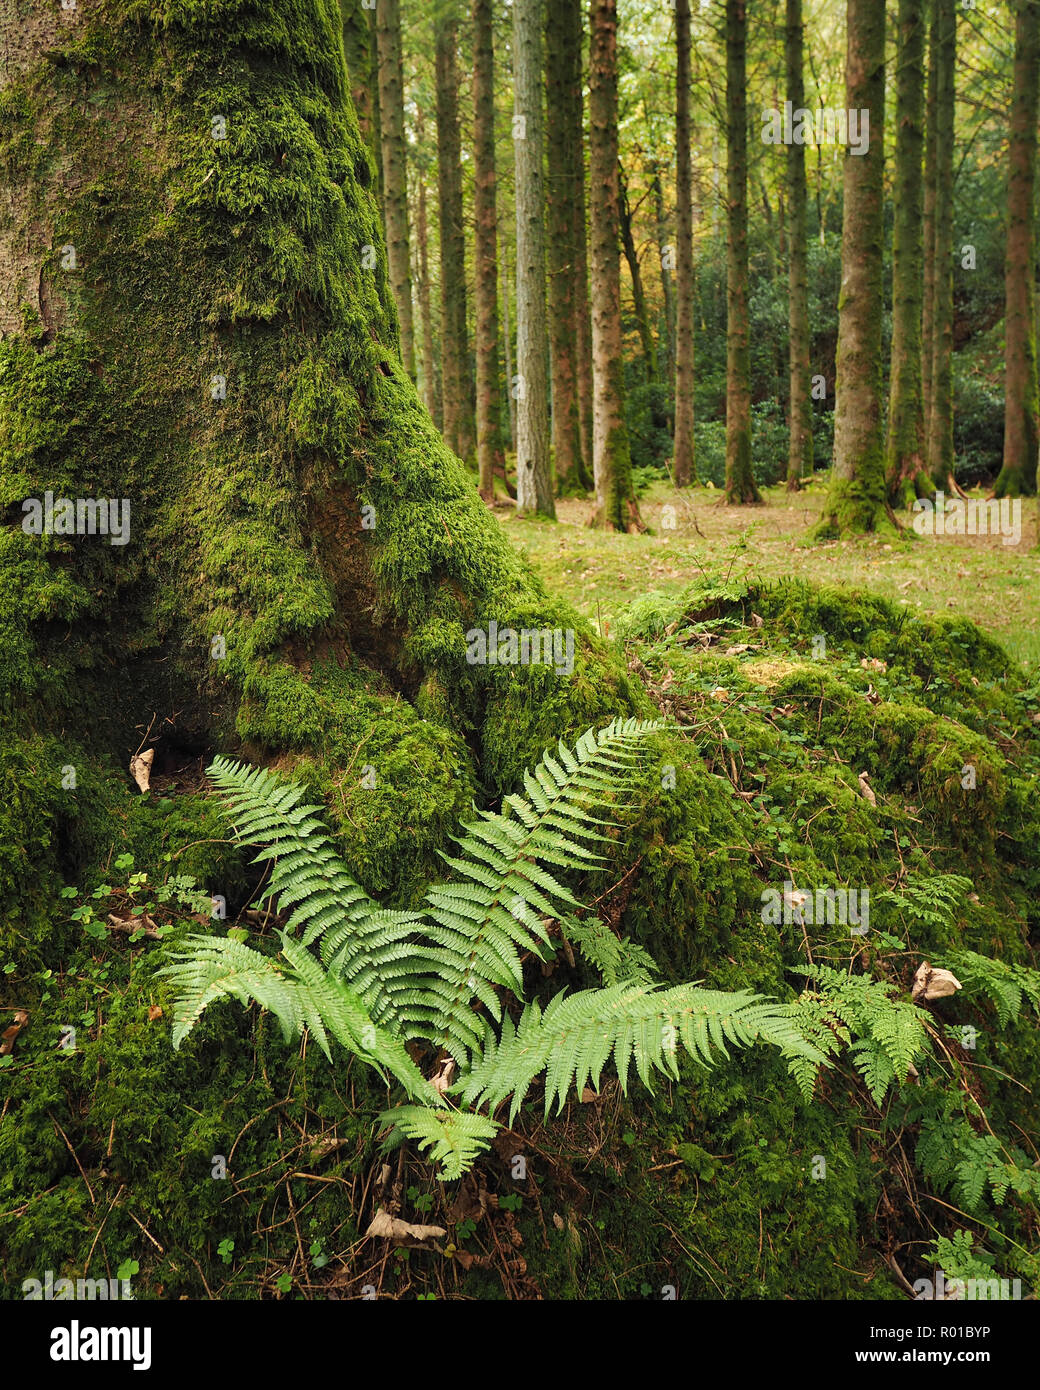 Fern growing near tree trunk in autumn woodland scene at Glengarra Woods, Cahir, Co. Tipperary Stock Photo